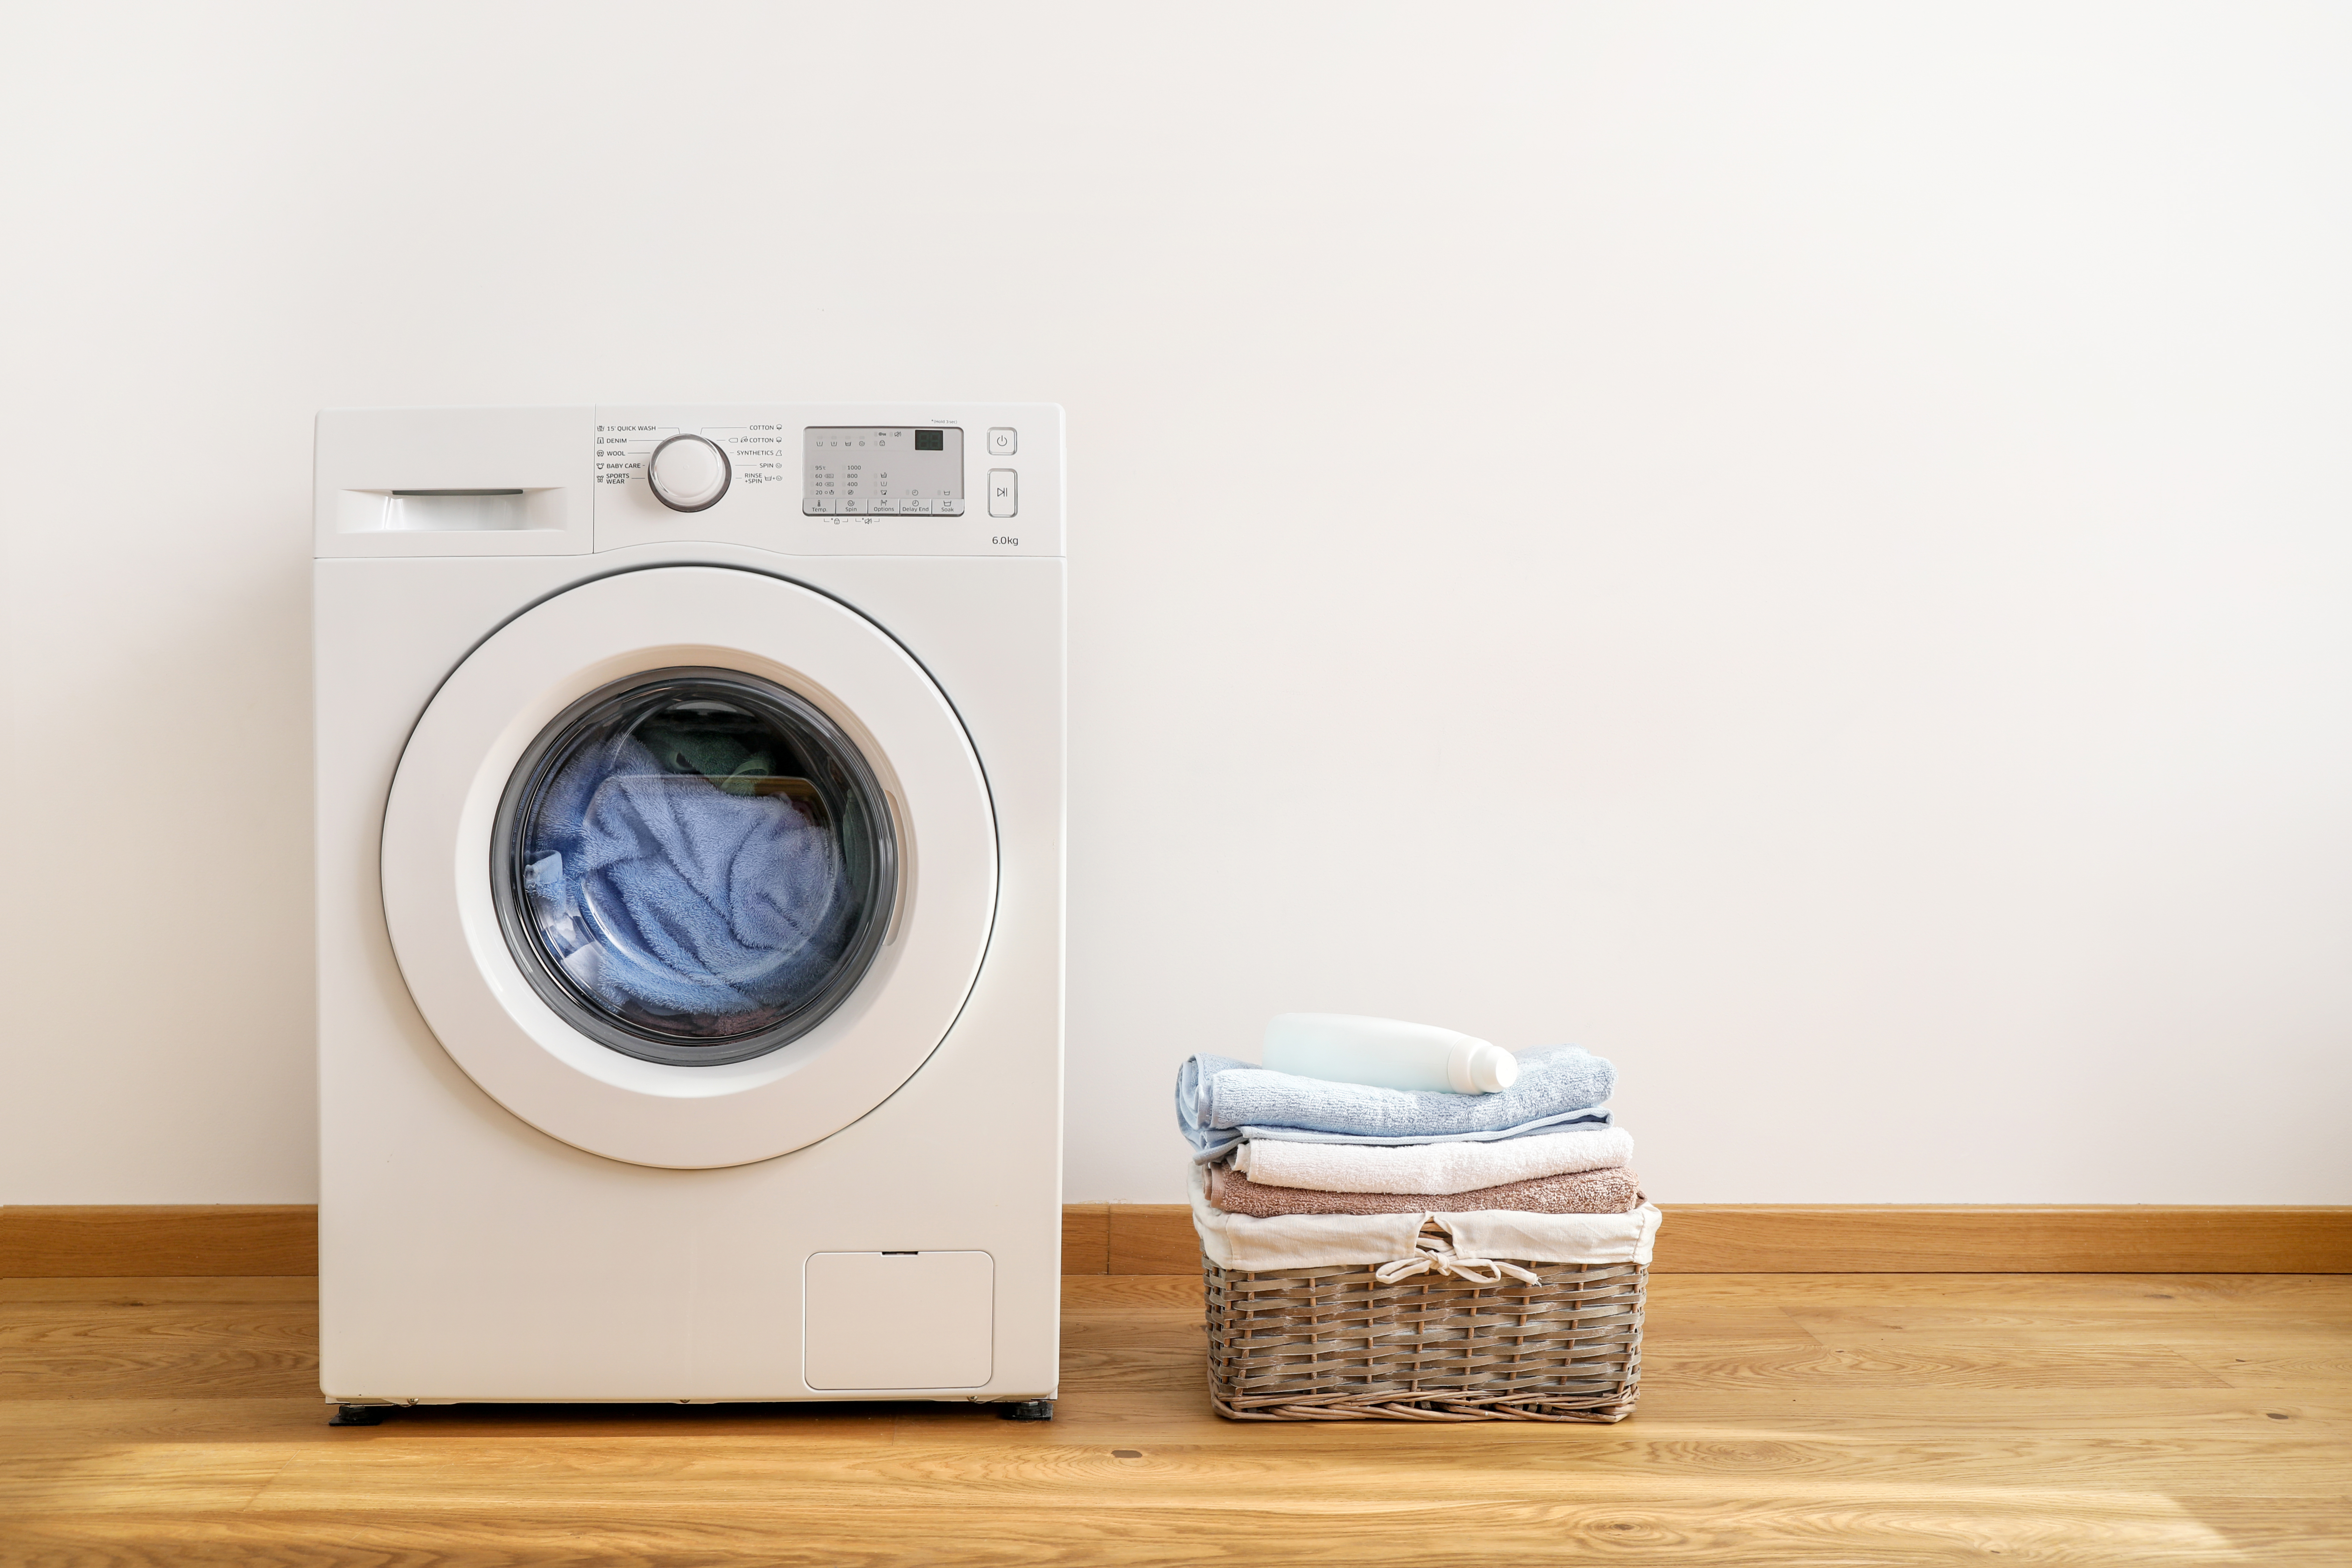 Clothes That Can Be Washed in Hot Water & When to Avoid Them